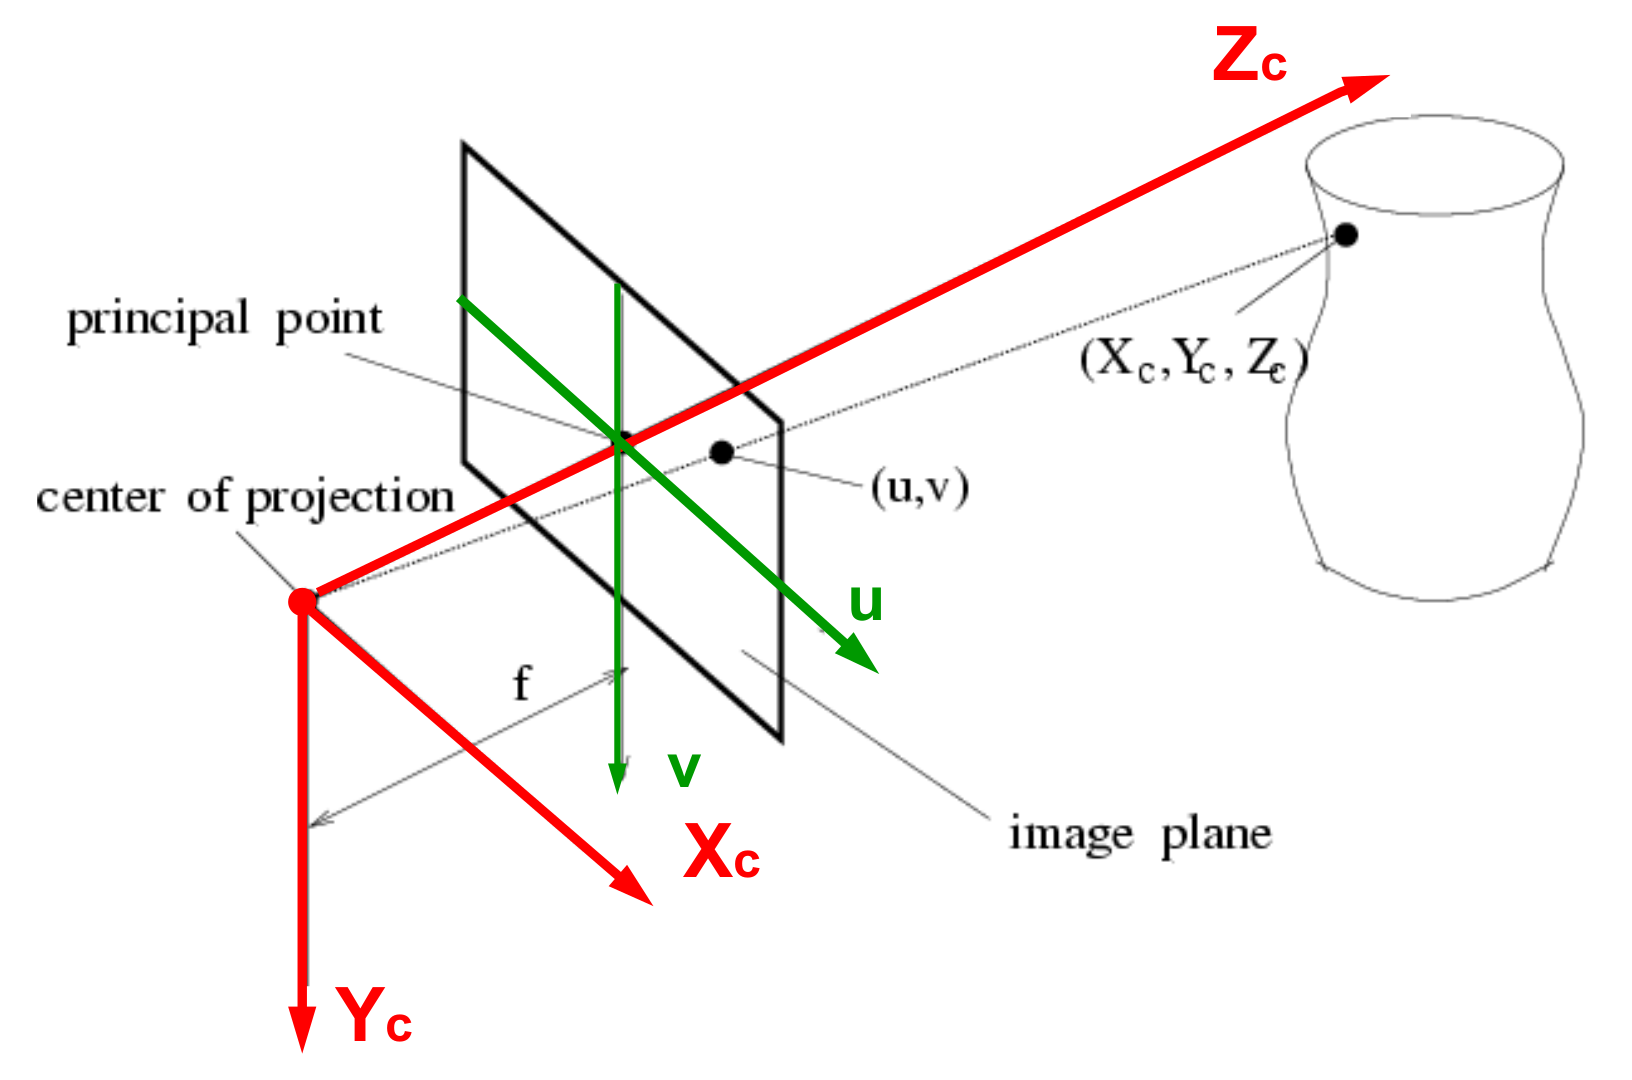 Perspective projection model